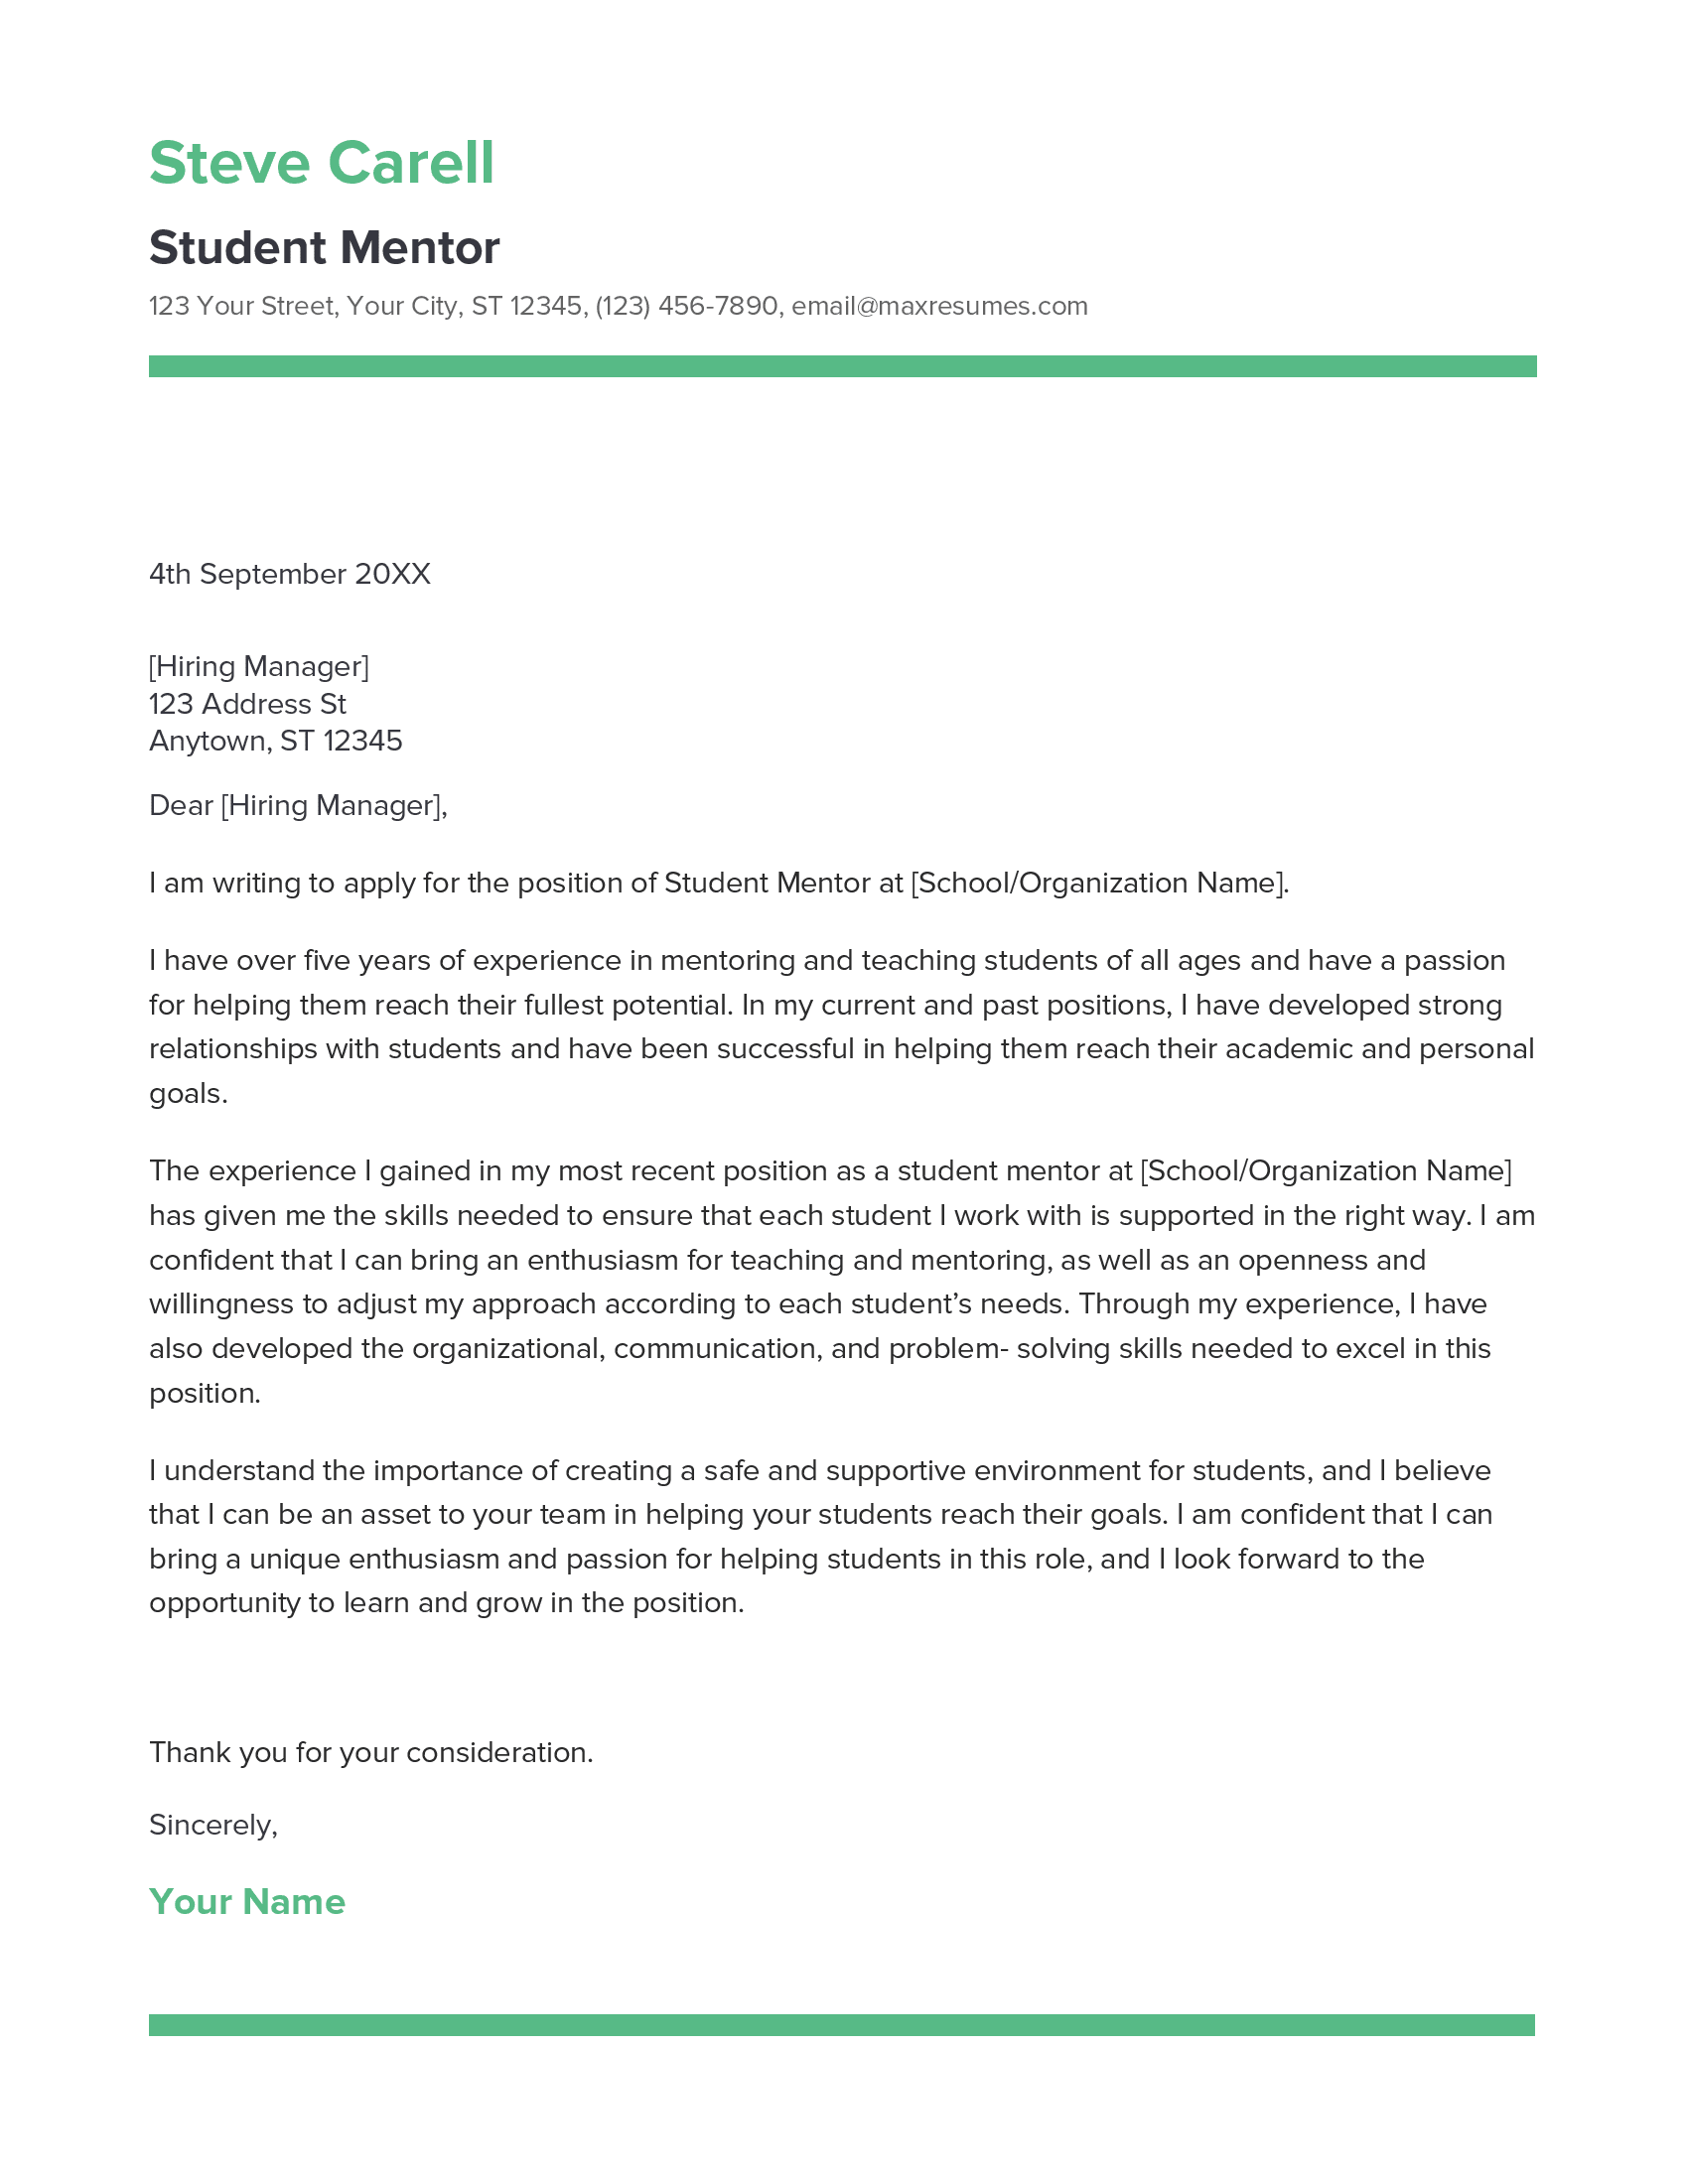 Student Mentor Cover Letter Example